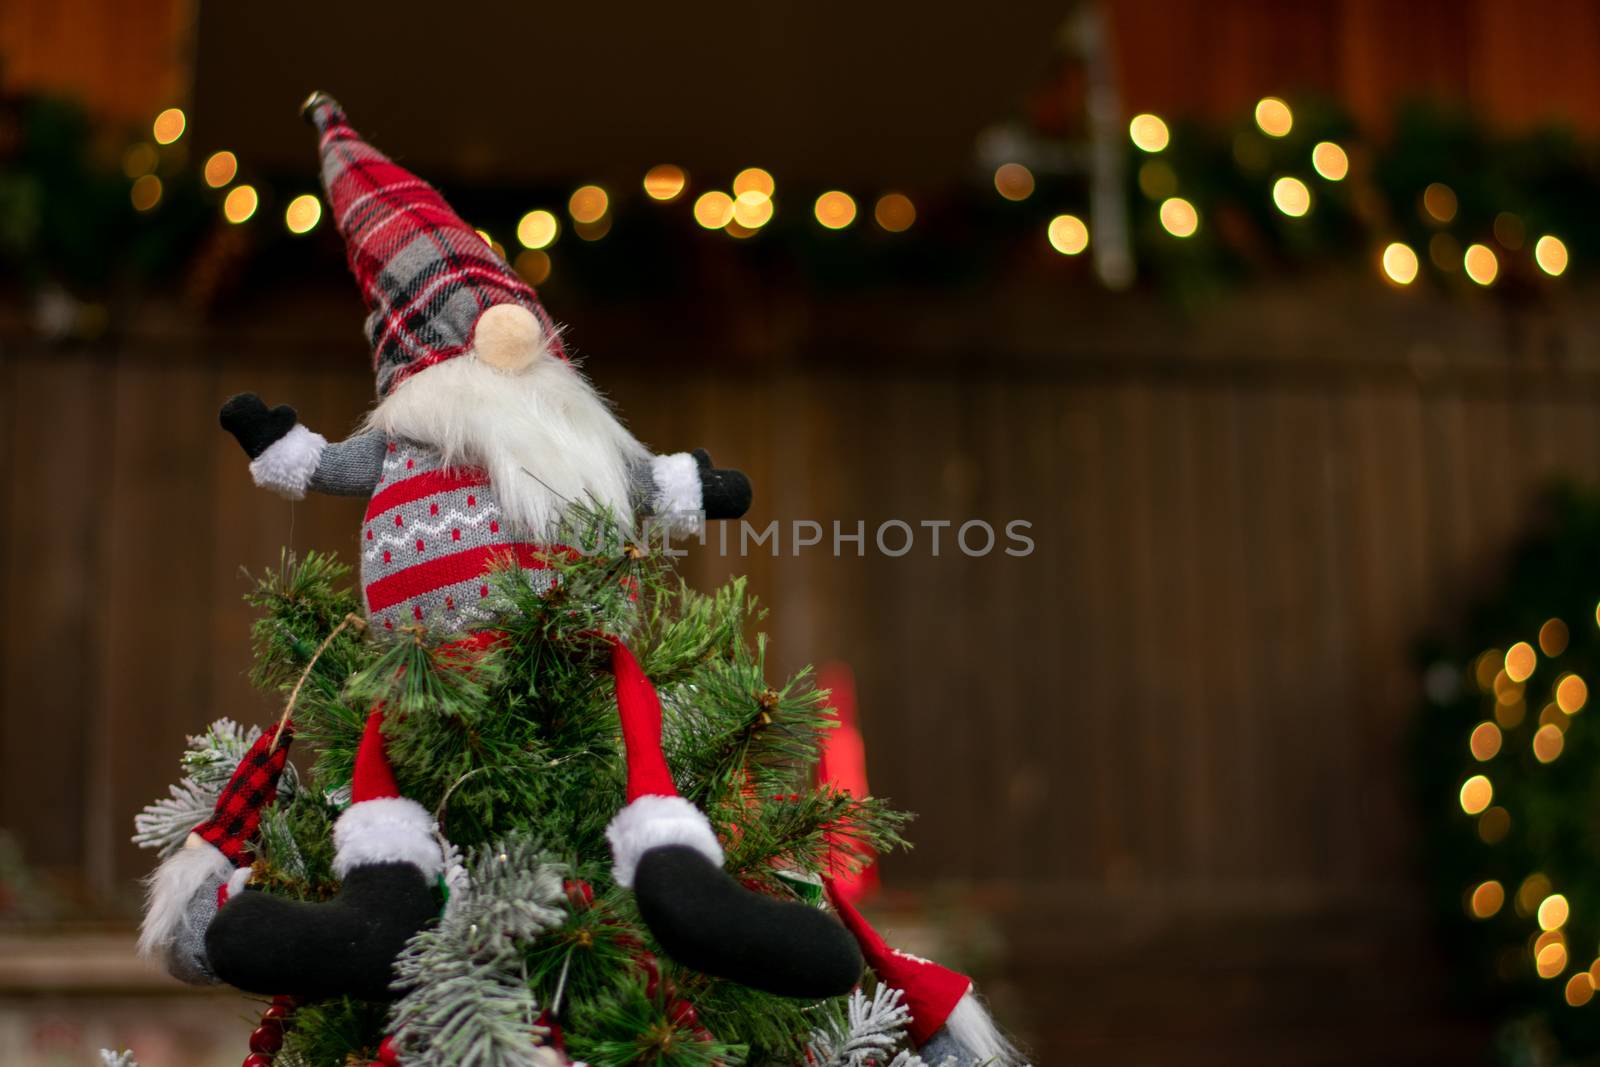 A Christmas Gnome Dressed in a Red Sweater and Hat With a Big Nose on Top of a Christmas Tree With Bokeh Christmas Lights in the Background